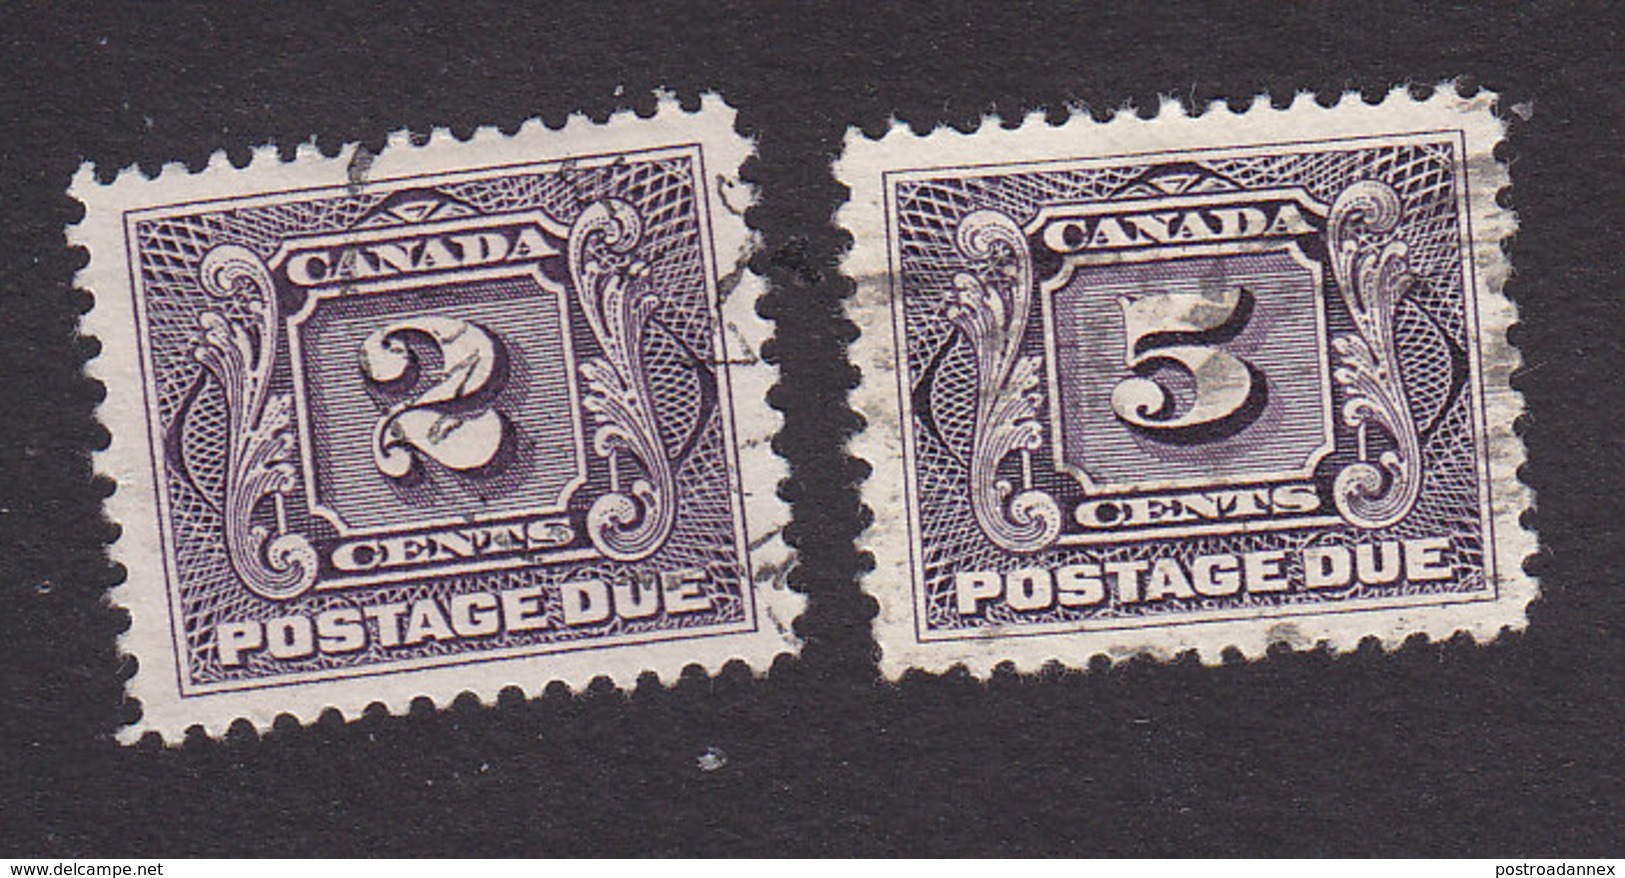 Canada, Scott #J2, J4, Used, Postage Due, Issued 1906 - Postage Due